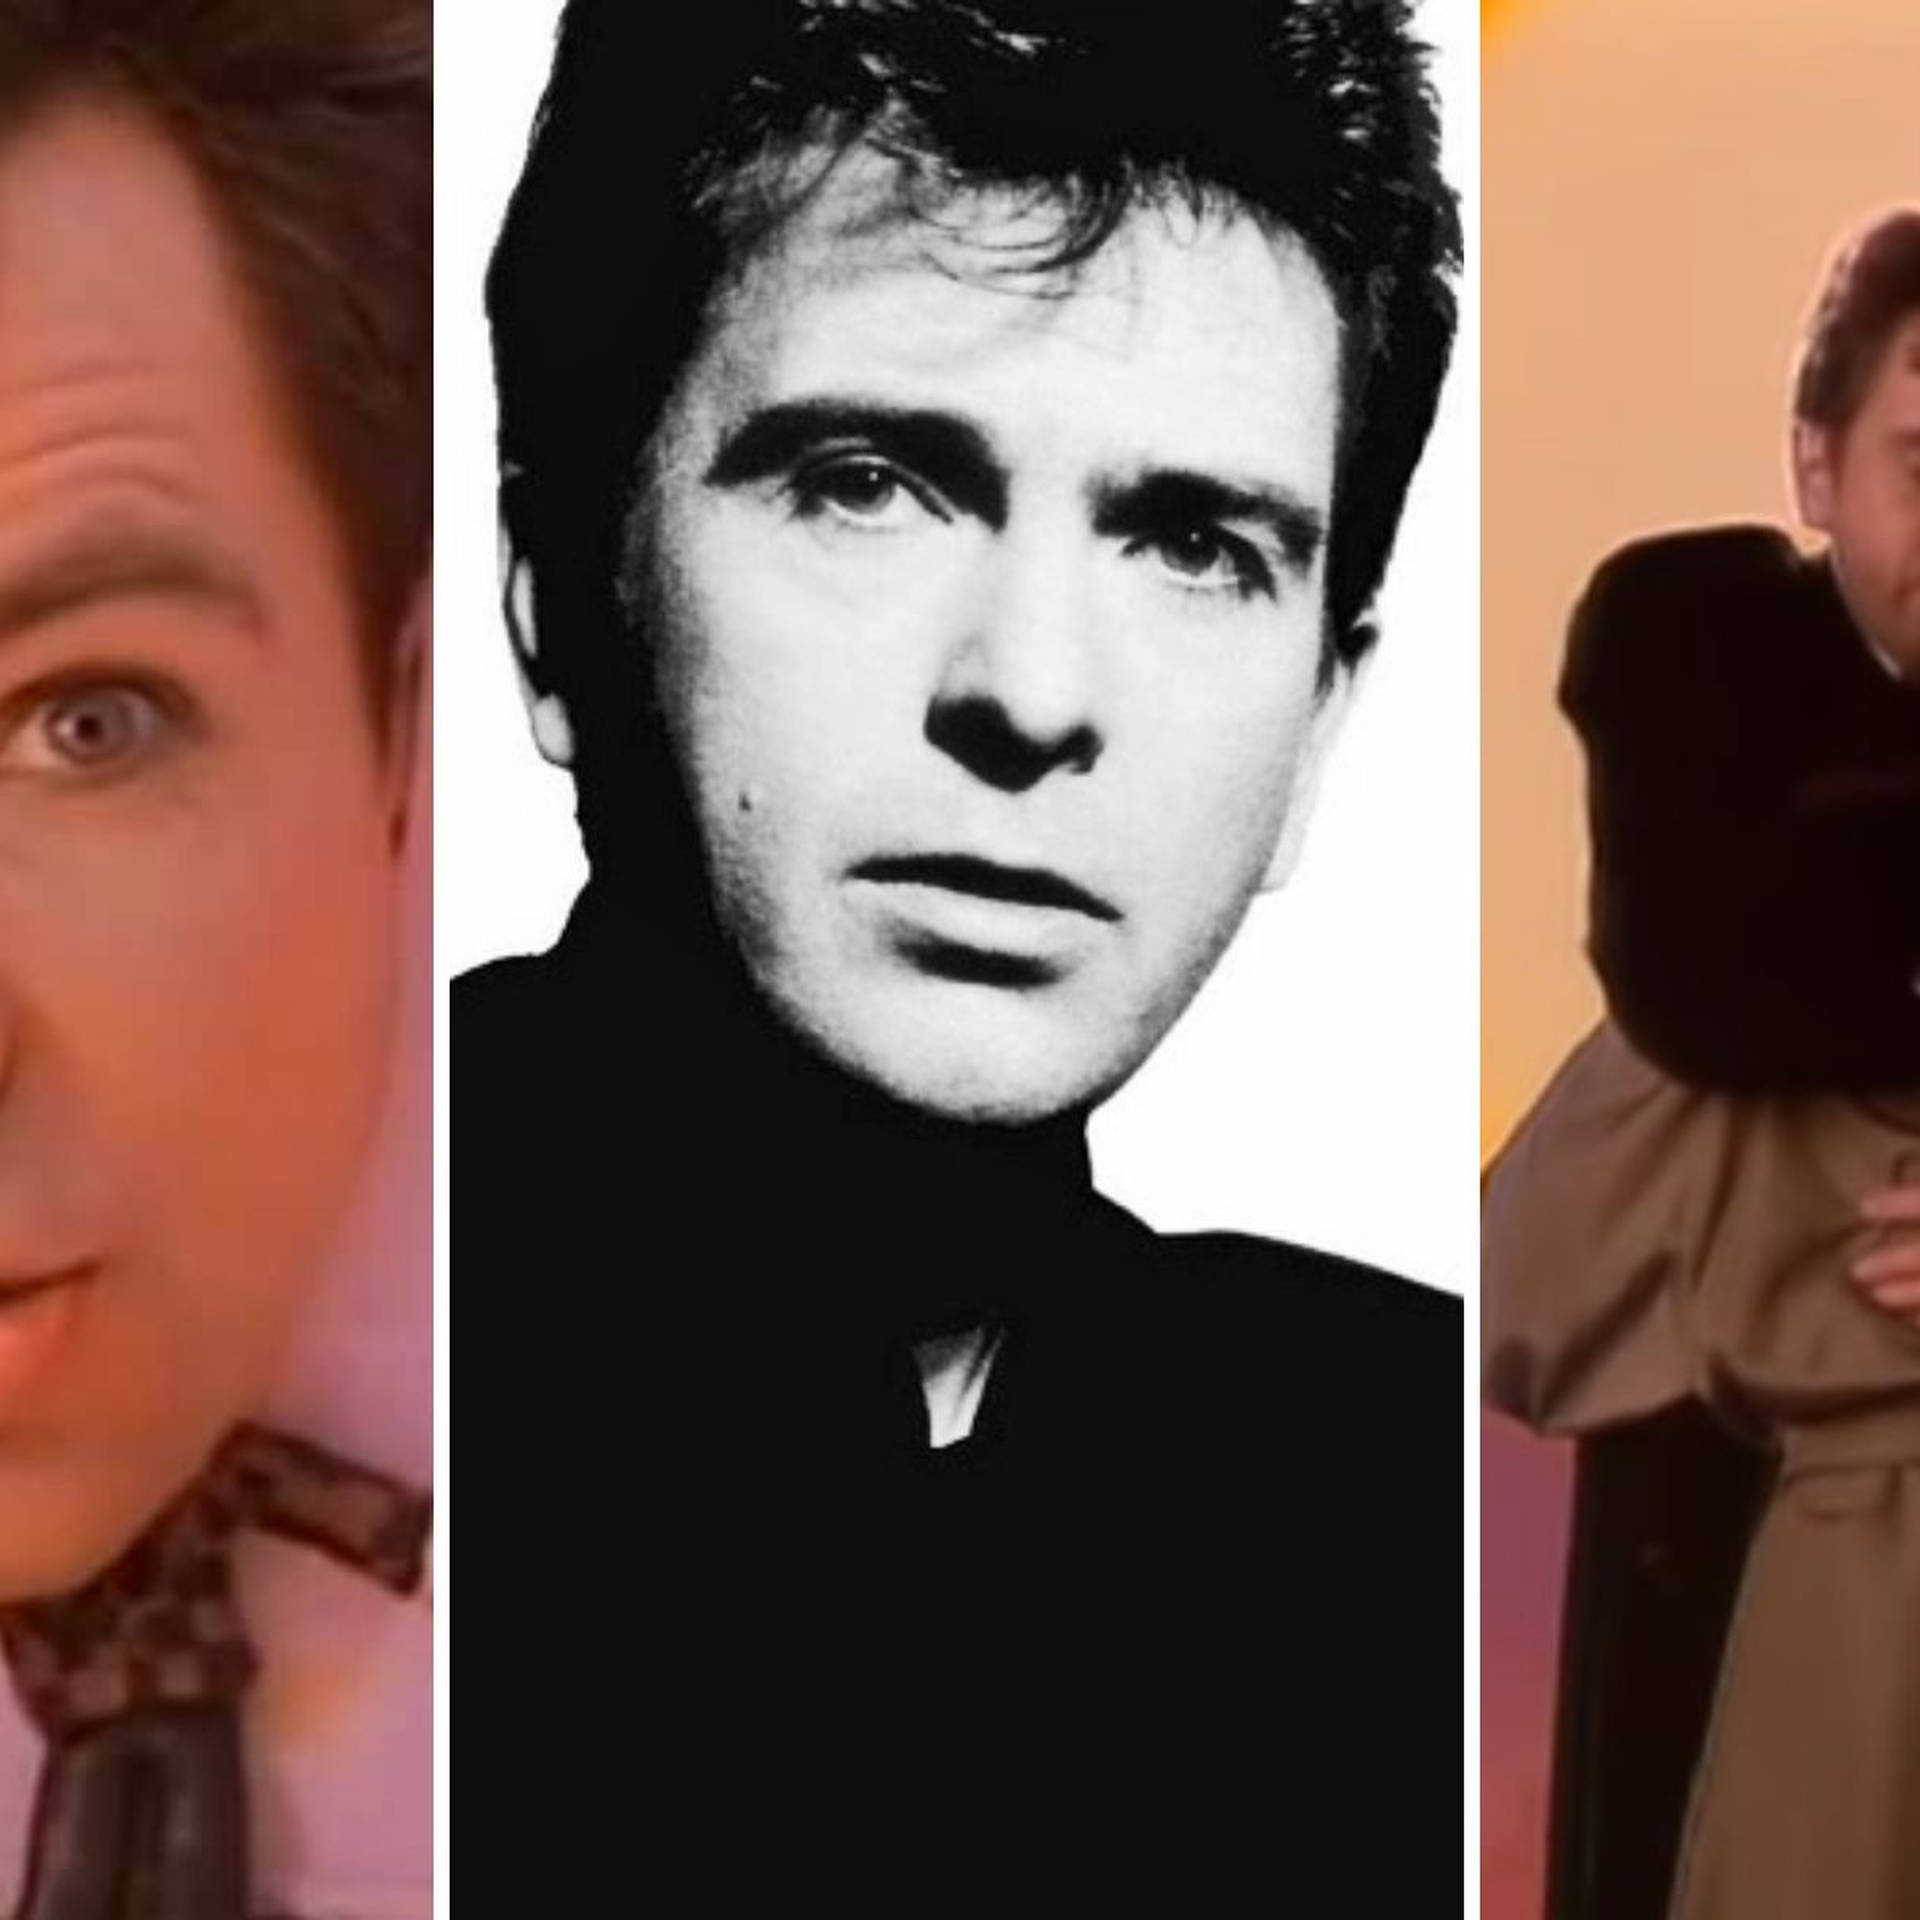 IV. Impact of Peter Gabriel's music videos on the music industry